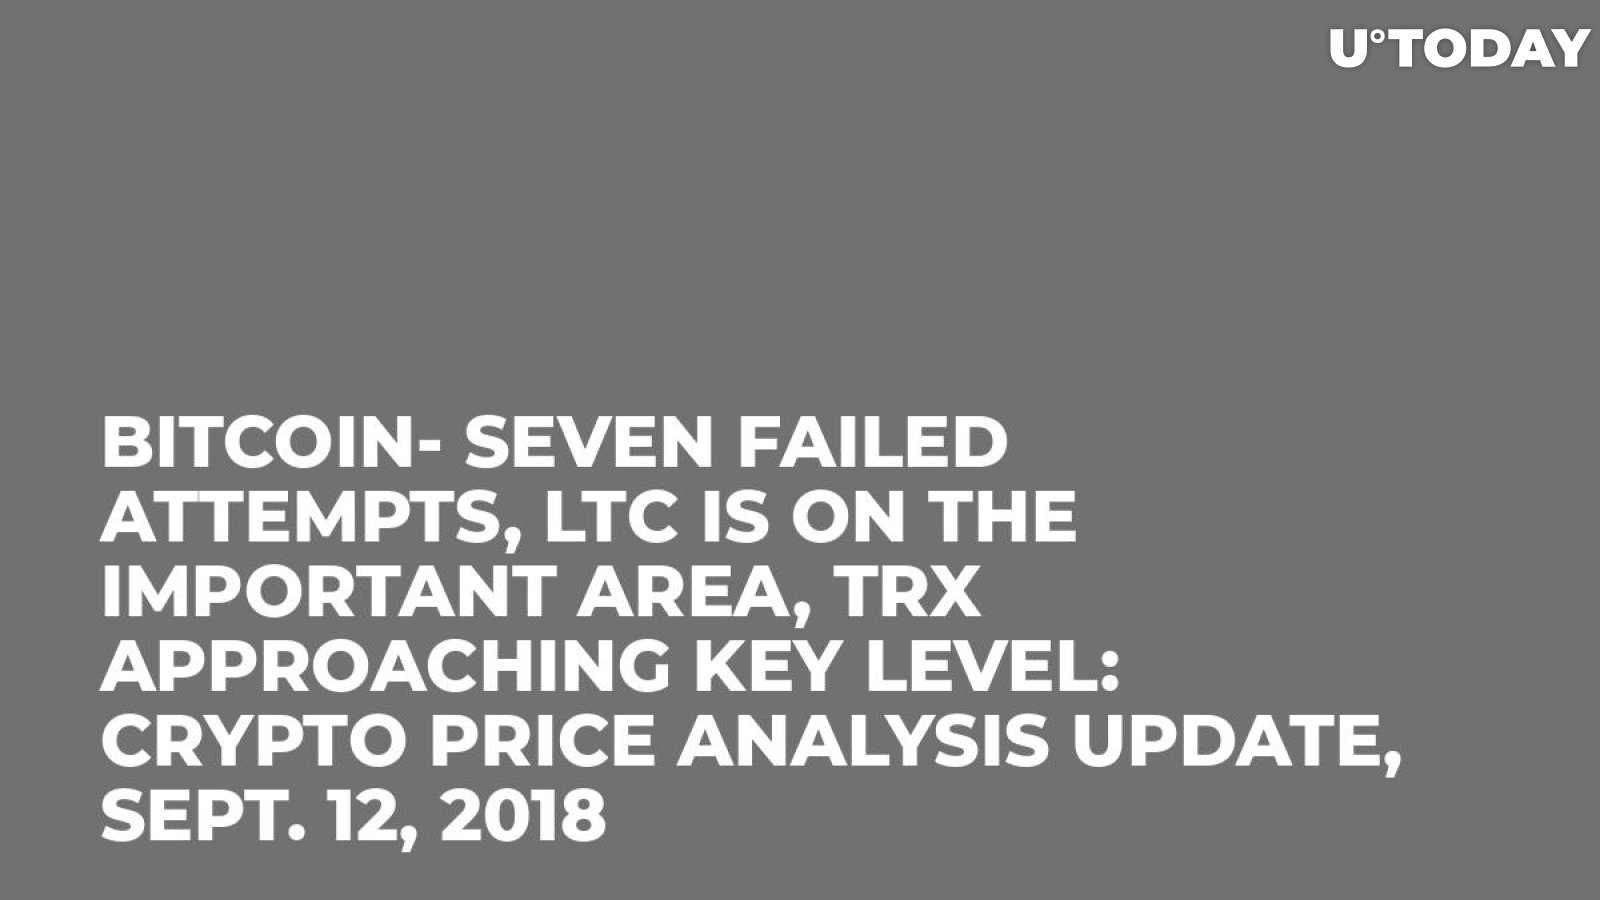 Bitcoin- Seven Failed Attempts, LTC is on the Important Area, TRX Approaching Key Level: Crypto Price Analysis Update, Sept. 12, 2018